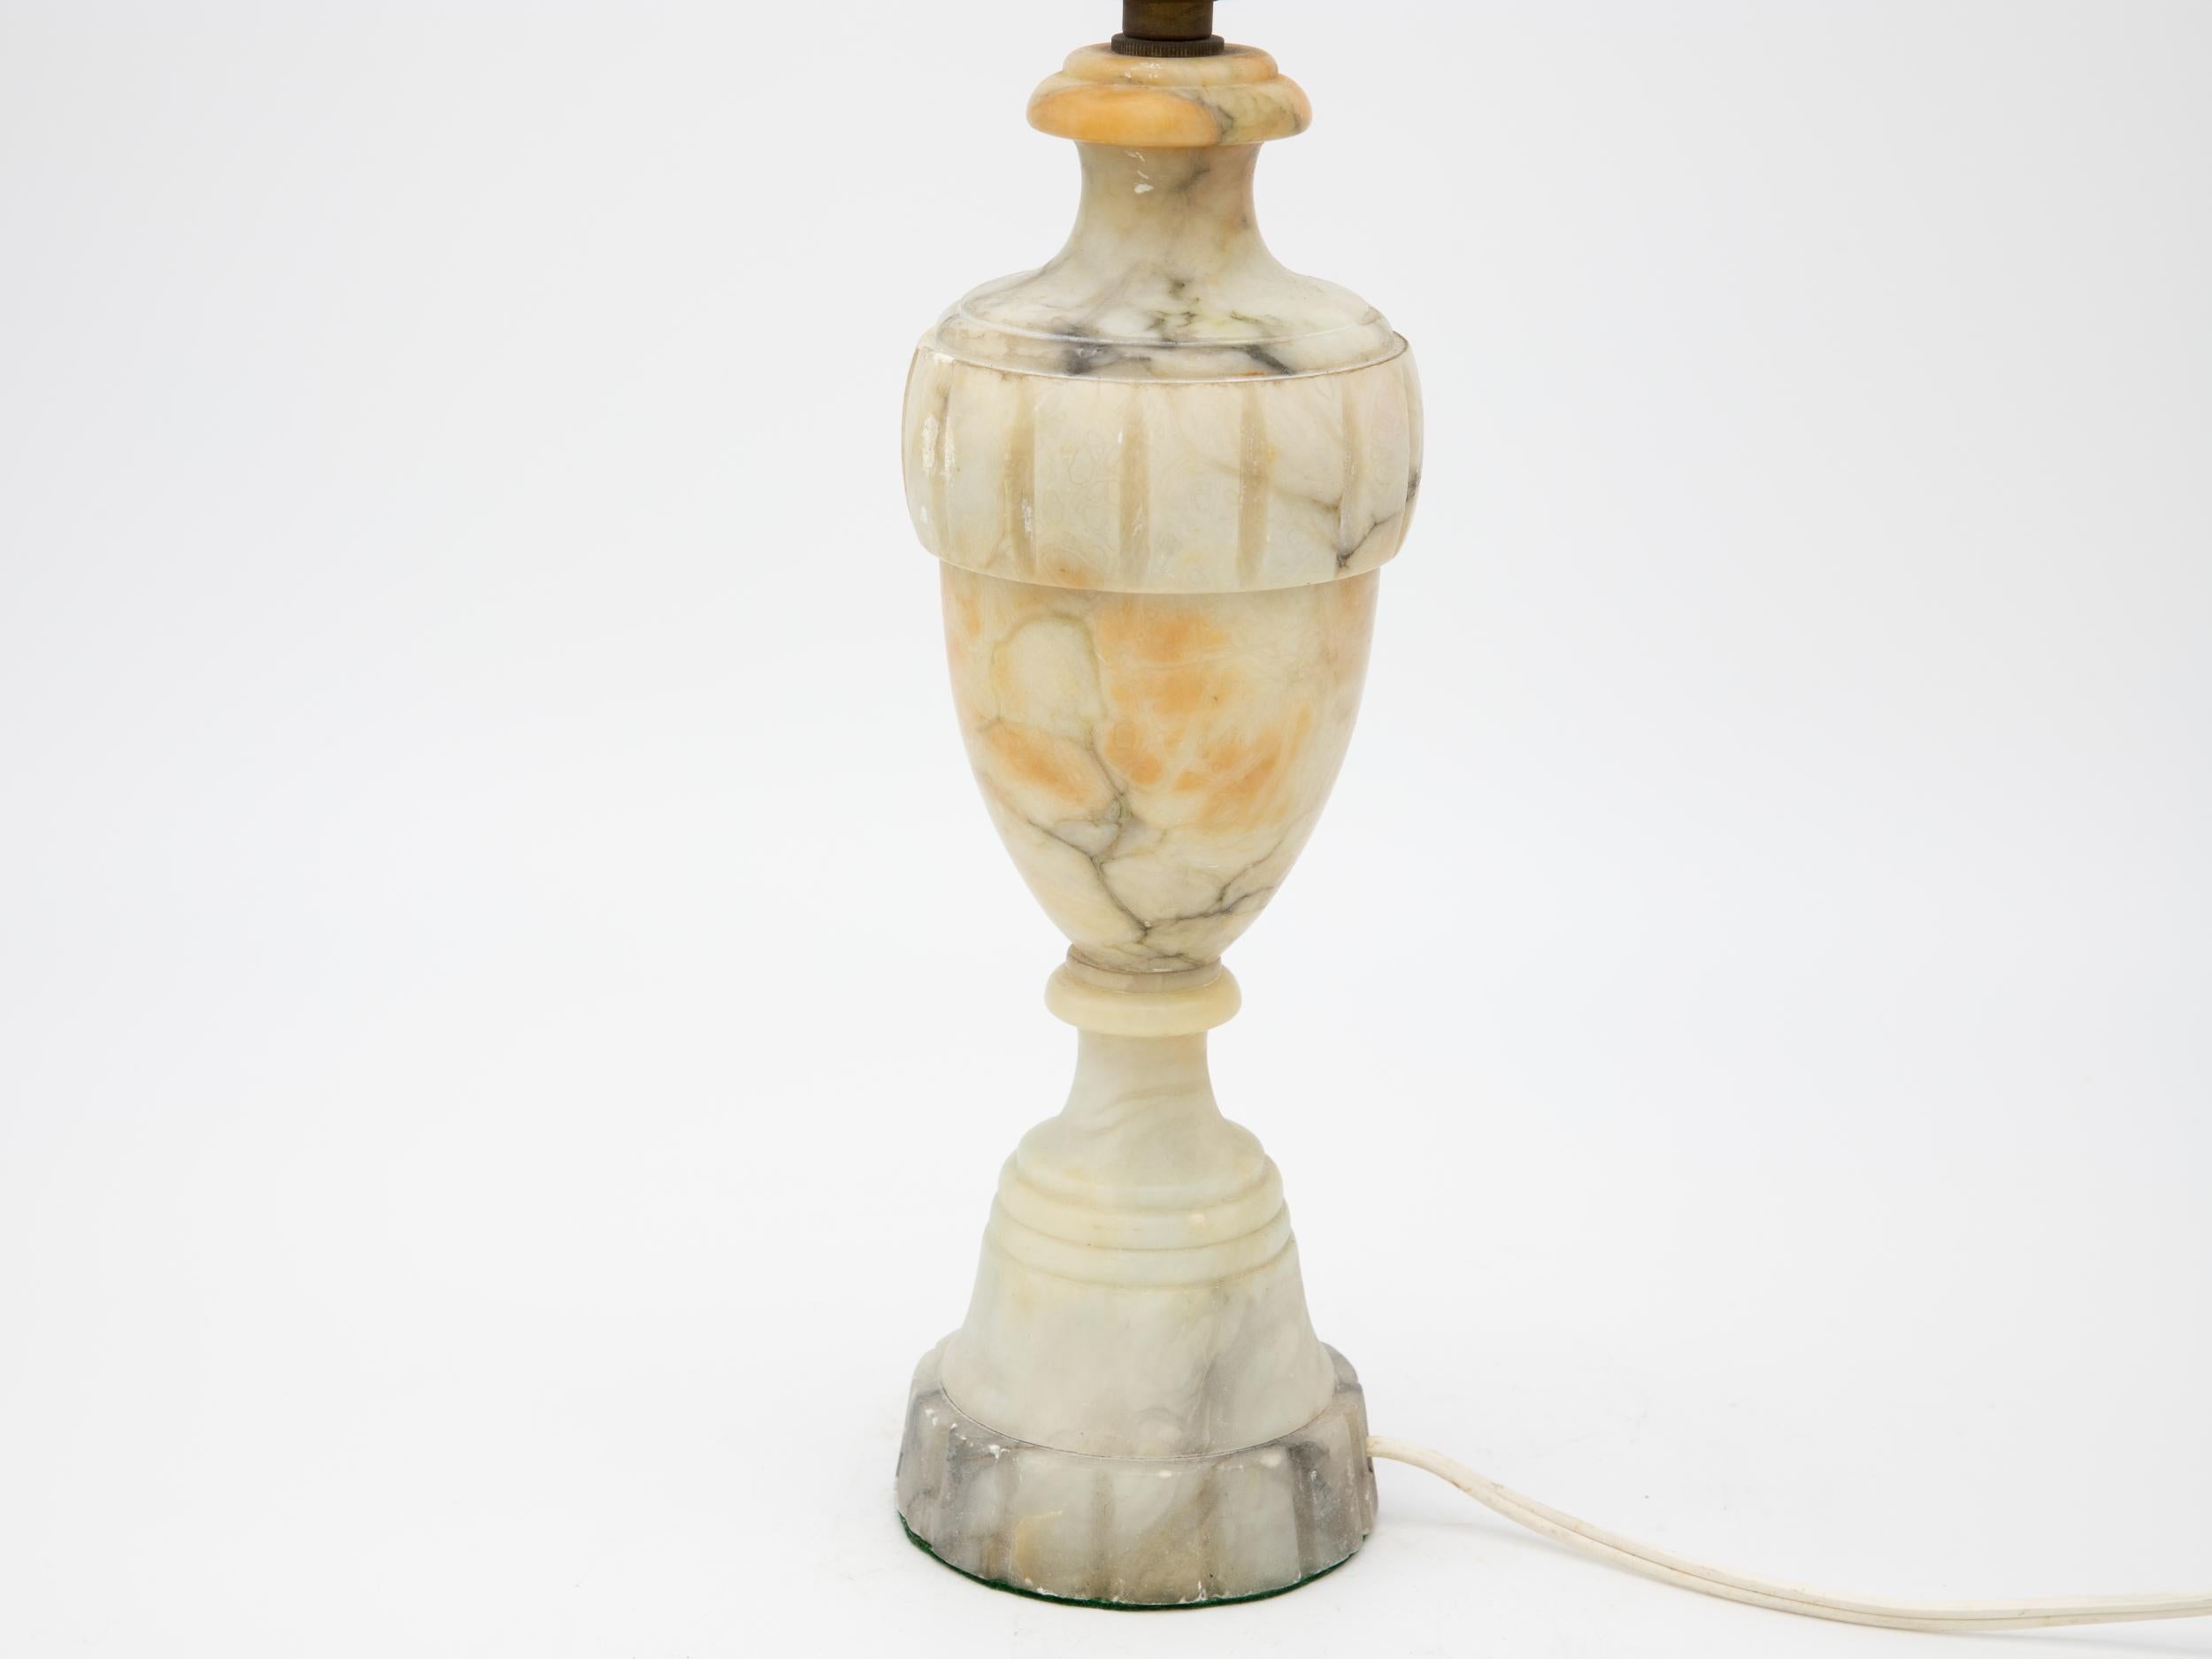 Large alabaster Neoclassical style urn lamp. Some gray coloring throughout the alabaster. Brown discoloration on the neck and body. Please see the photos. Early 20th century. Rewired. Harp and shade not included.